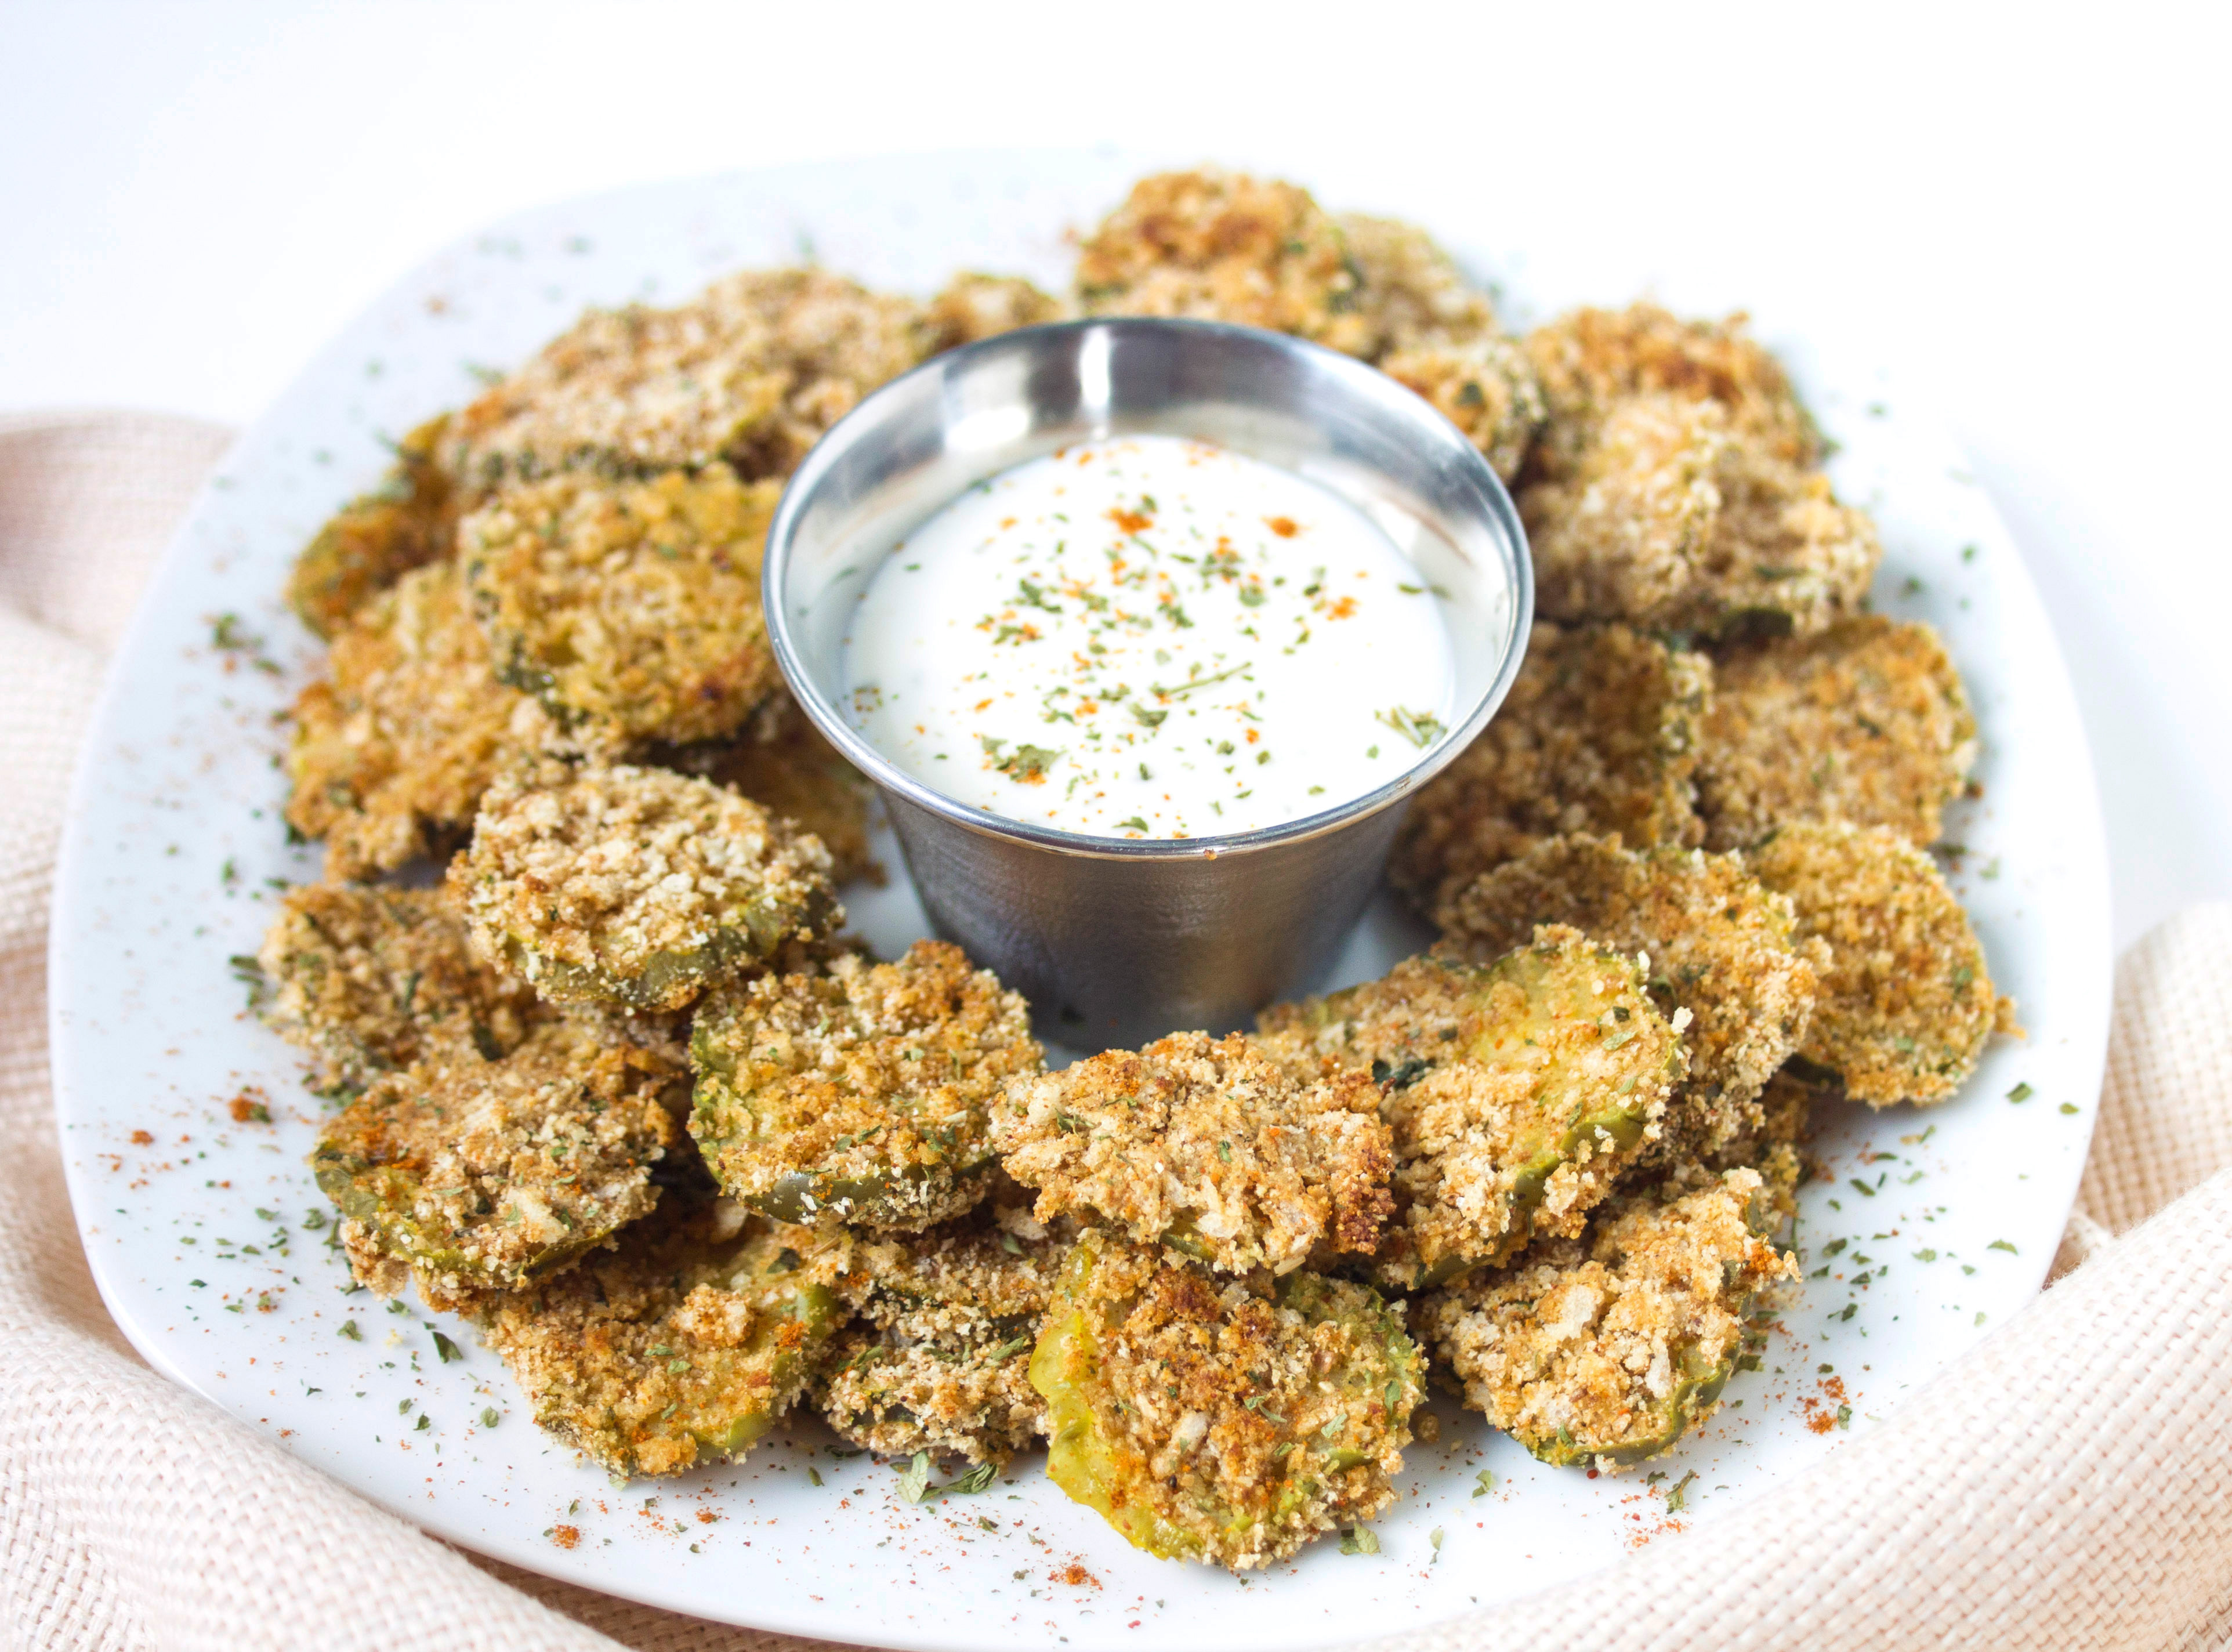 Baked “Fried” Pickles